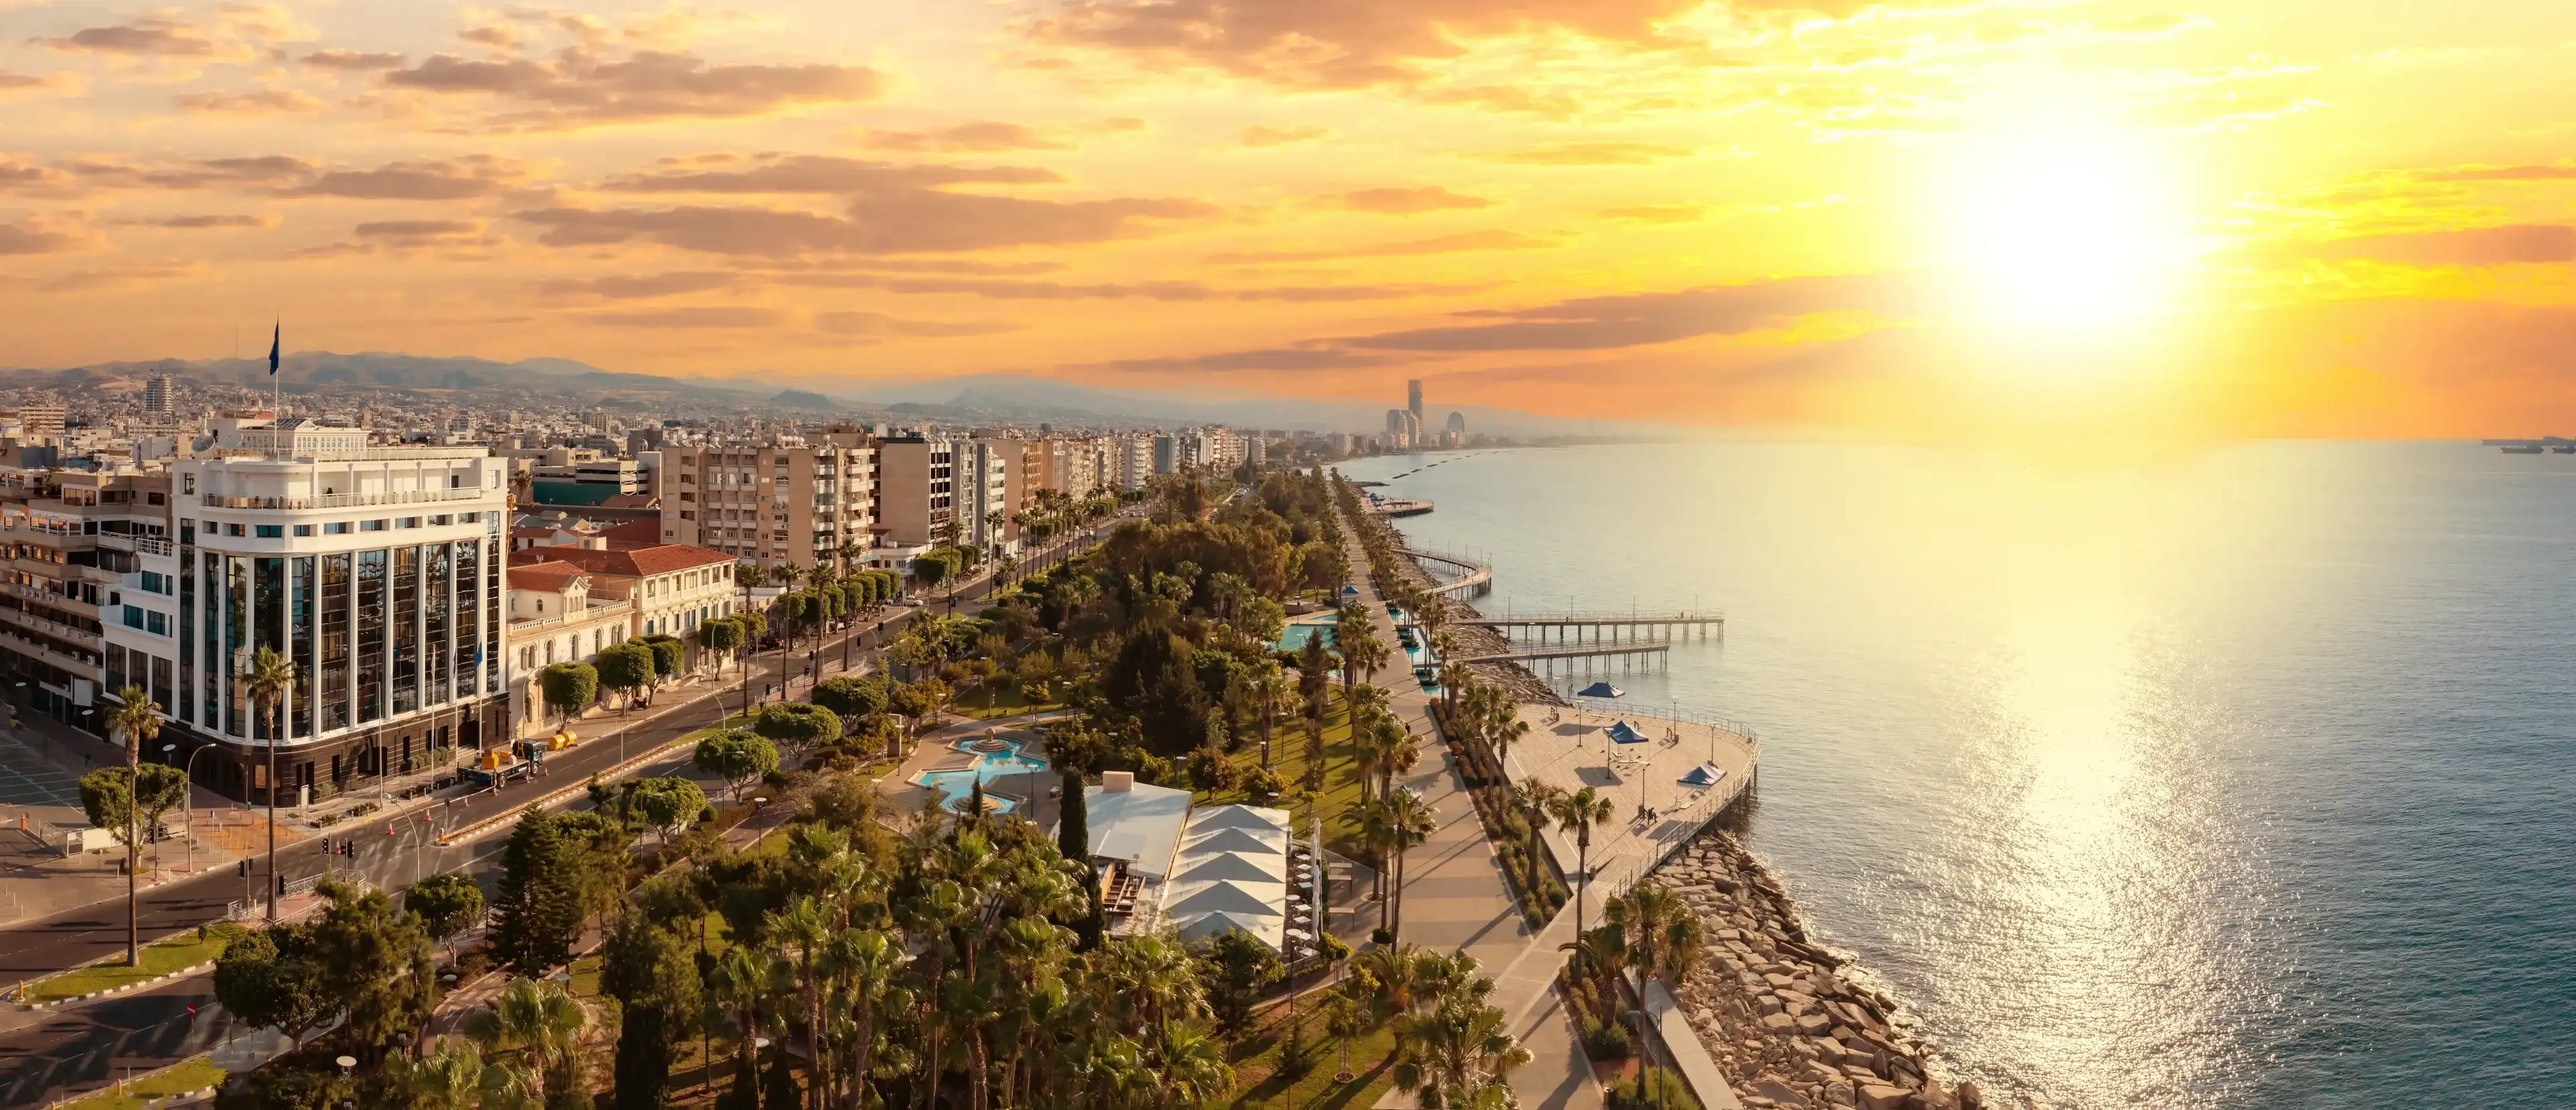 Sunset in Cyprus. Limassol beach. Embankment with piers. Cyprus on summer evening. Panorama Limassol resort. Urban landscape with hotels near sea. Cyprus tourism. Panorama Limassol view from drone